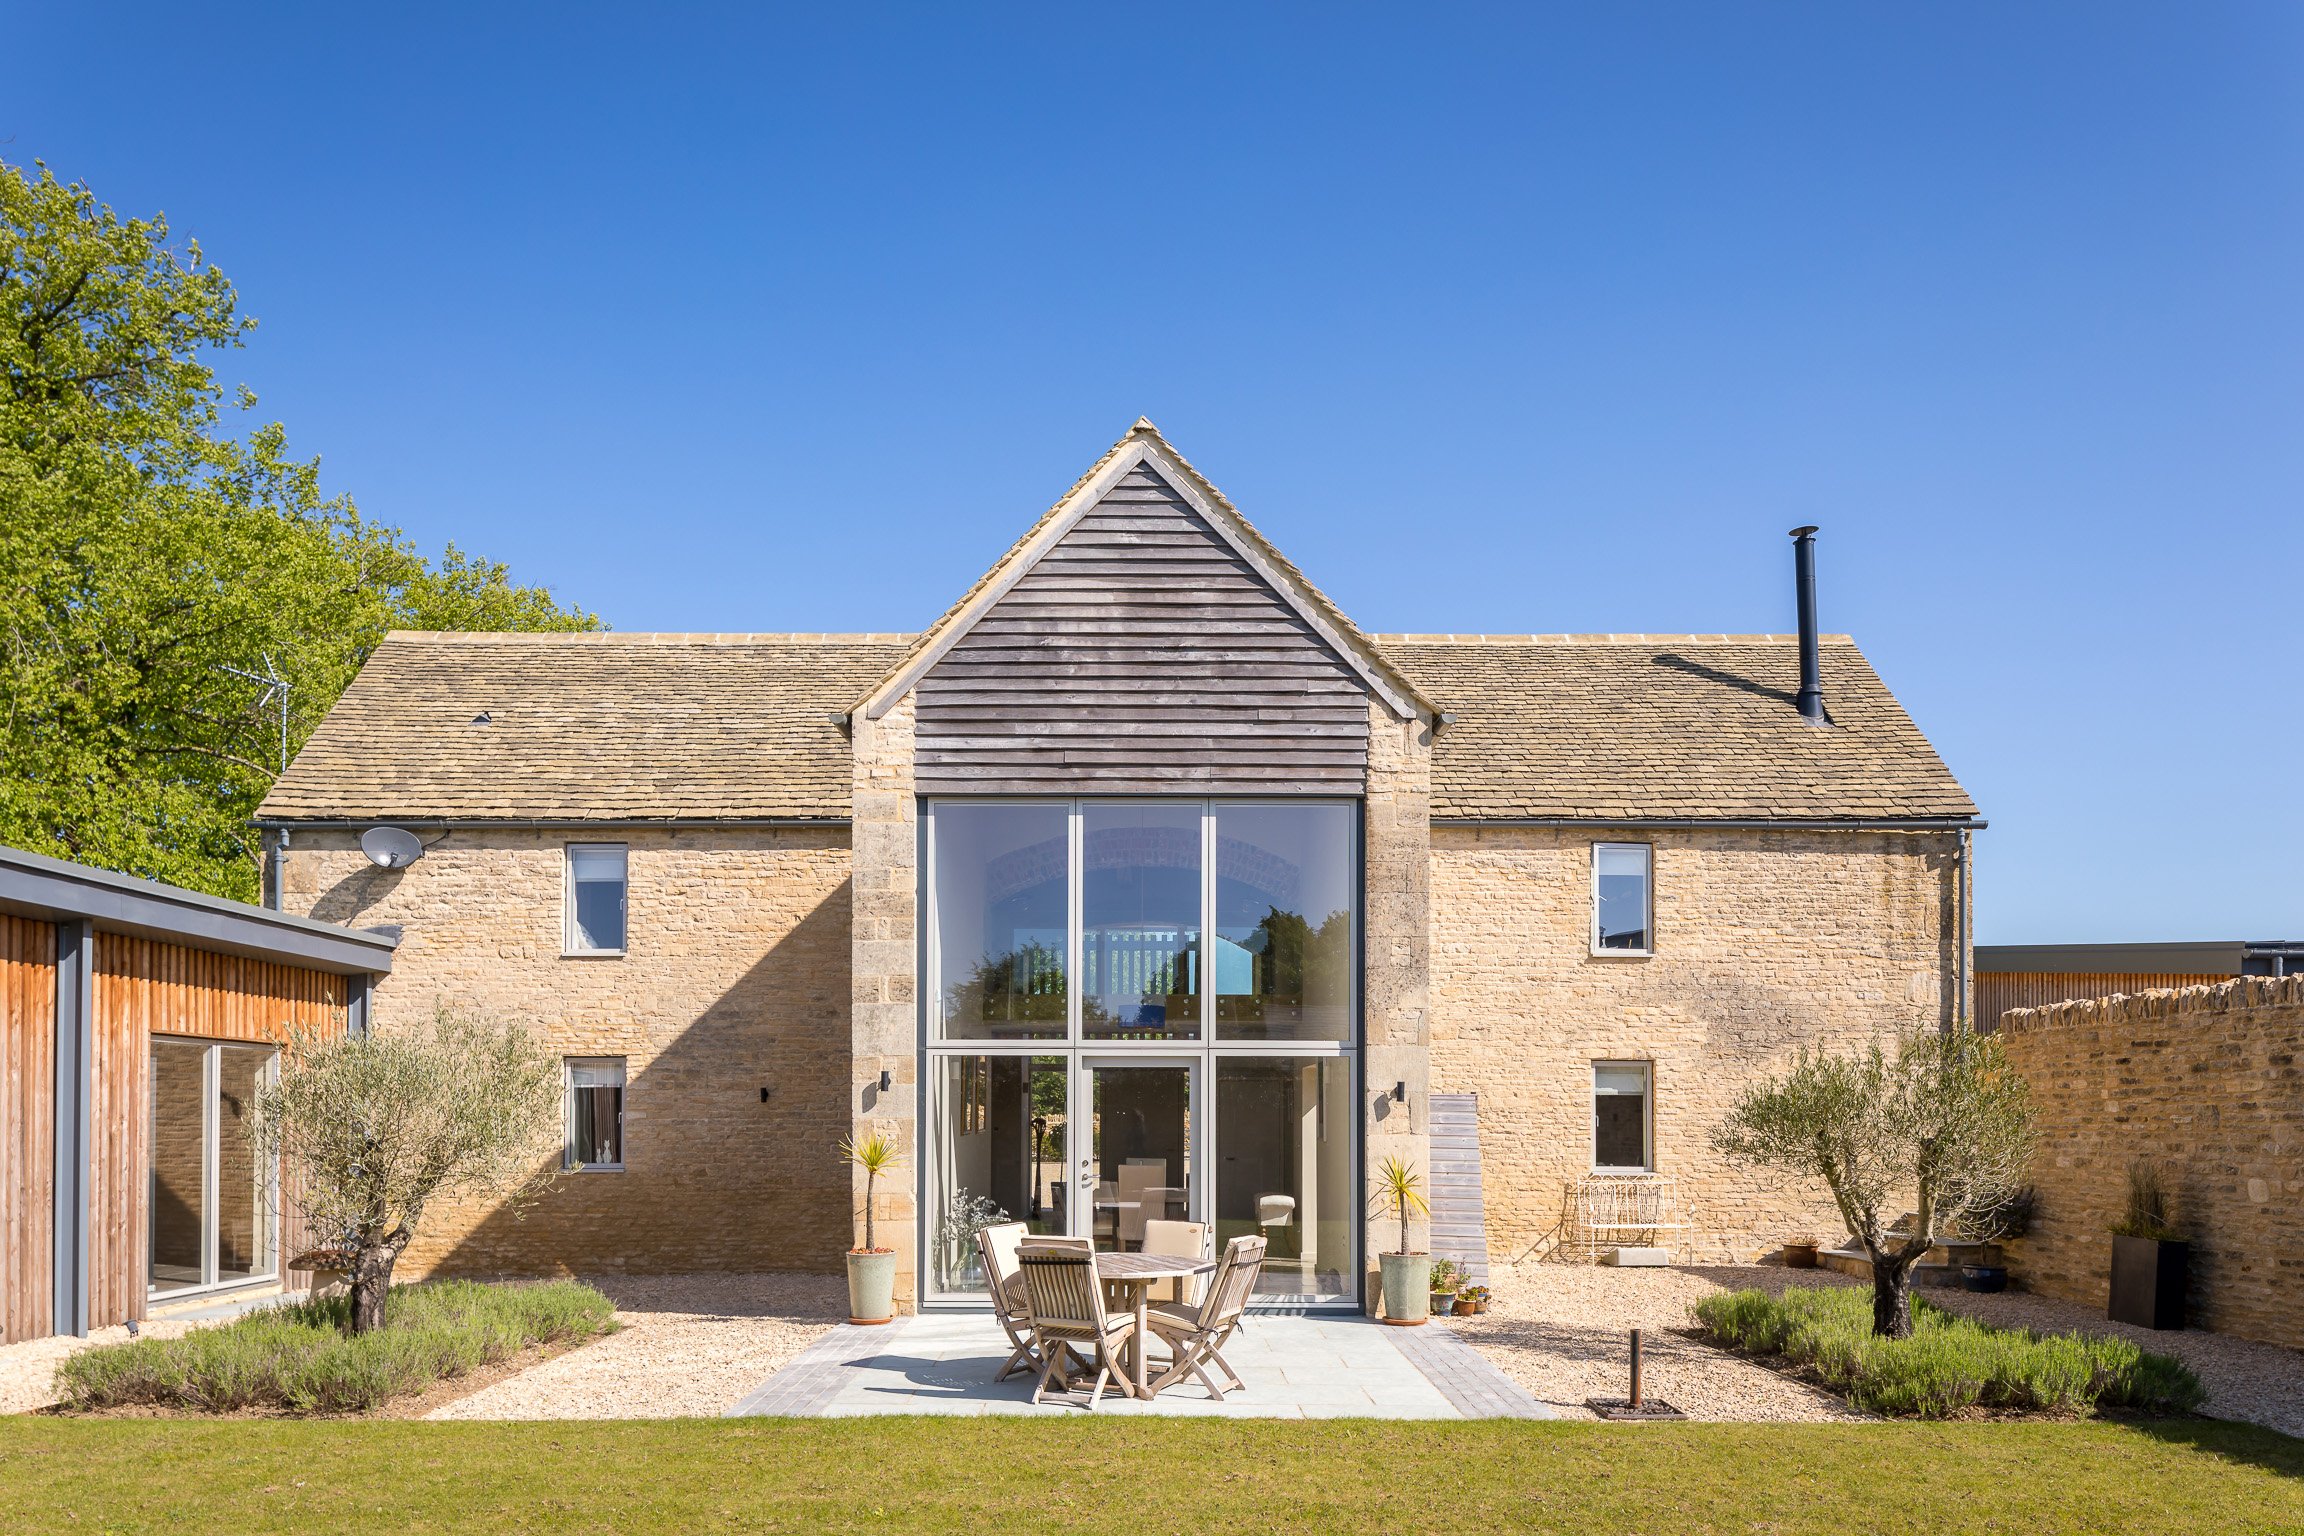 24 - Architecture, Cotswold, Photographer, Residential, Wiltshire.jpg